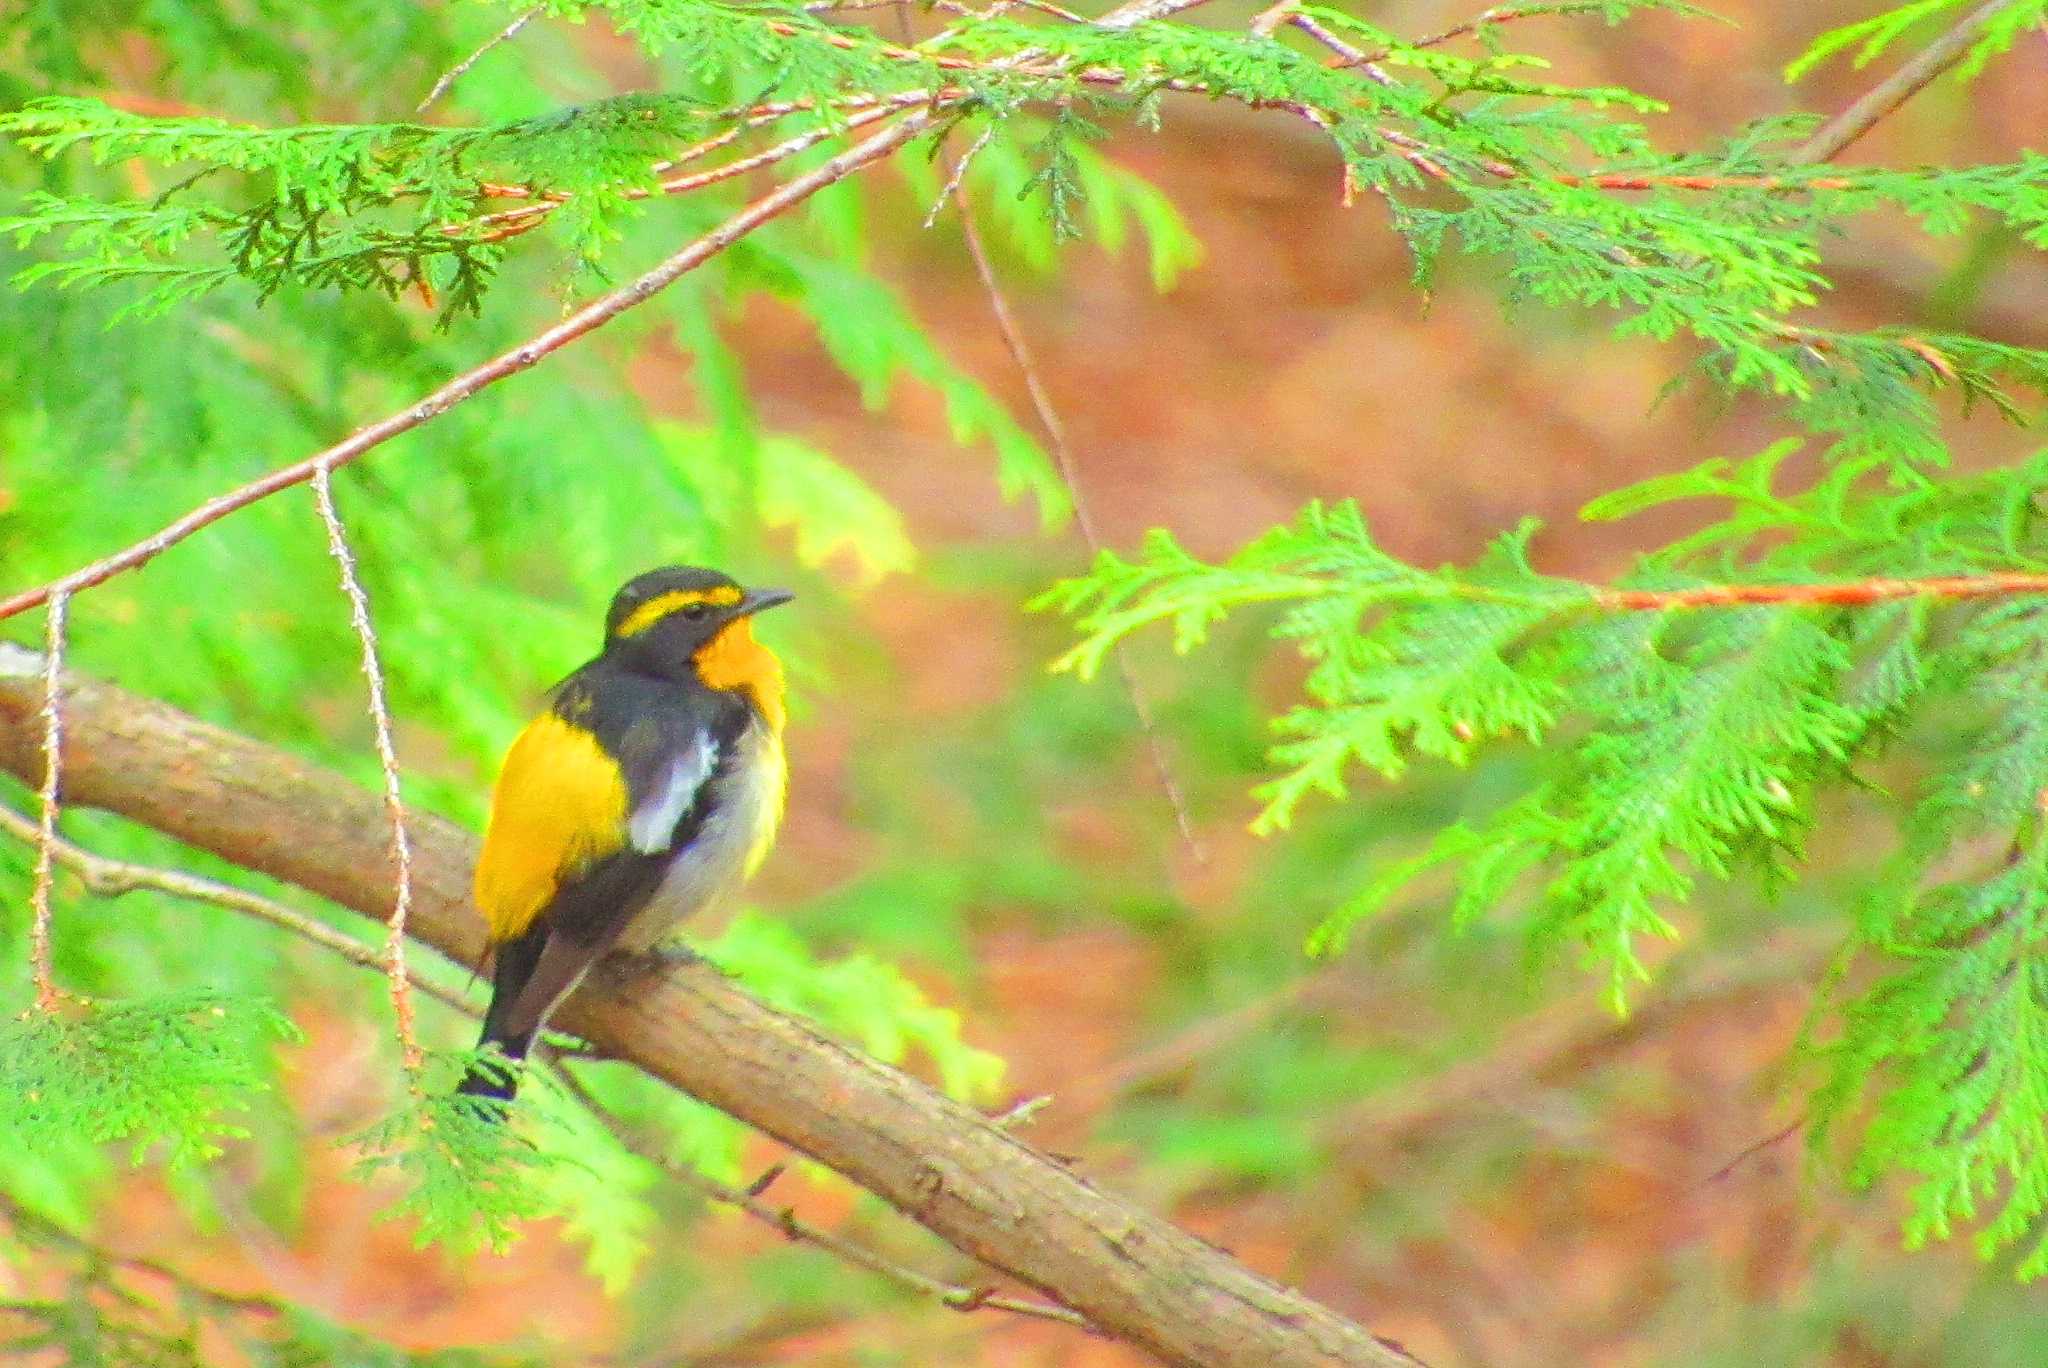 Photo of Narcissus Flycatcher at Yanagisawa Pass by 小学生バーダーじゅんな